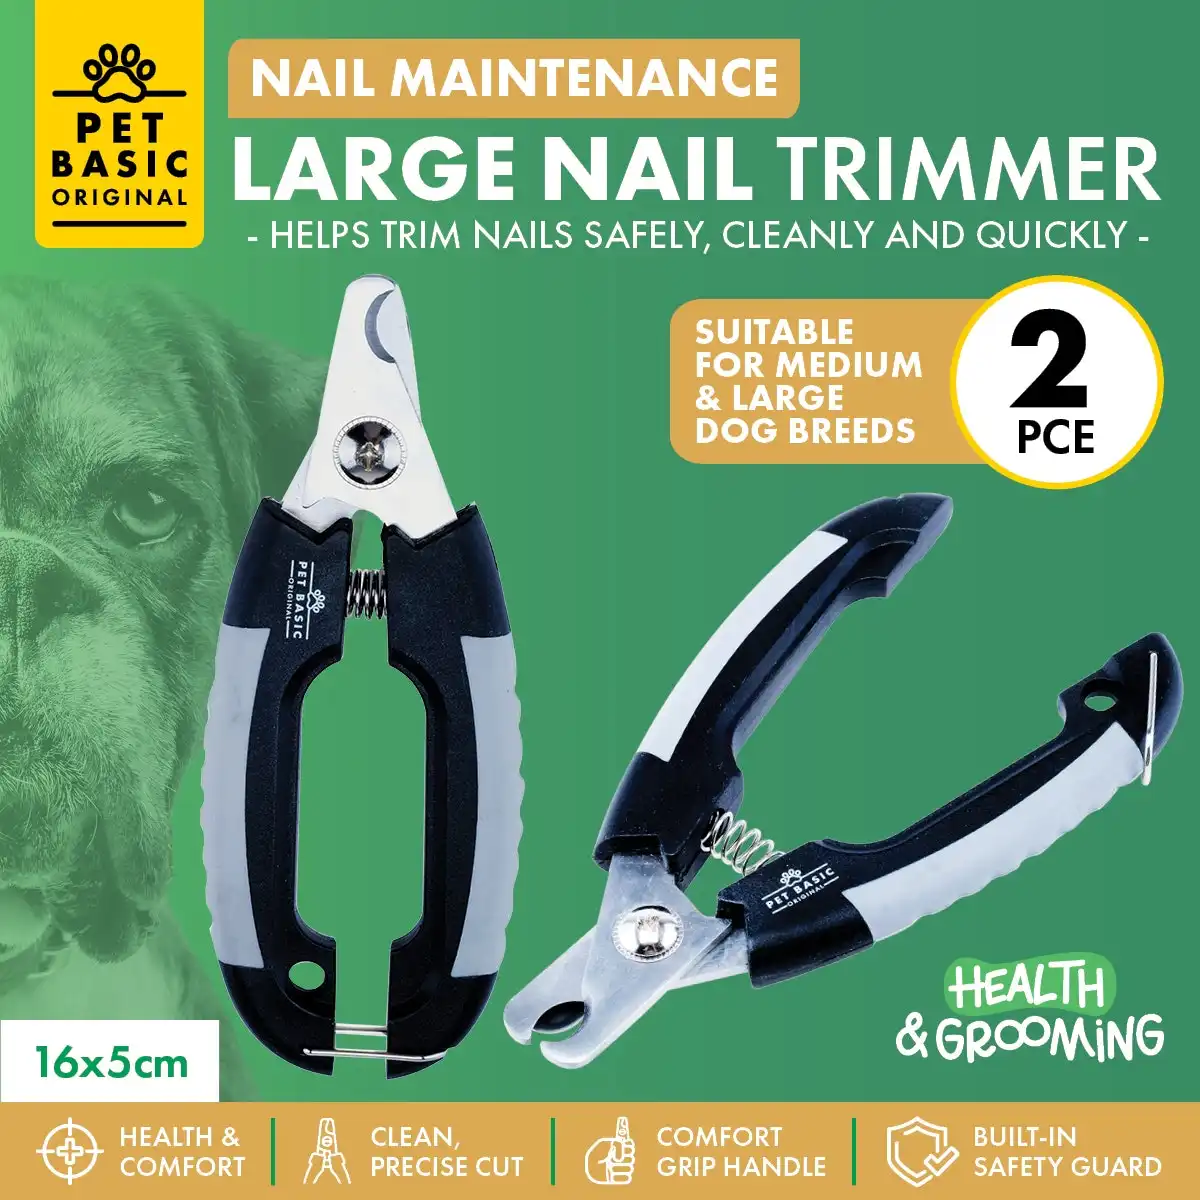 Pet Basic® 2PCE Nail Trimmers Medium/Large Breeds Built-In Safety Guard 16cm